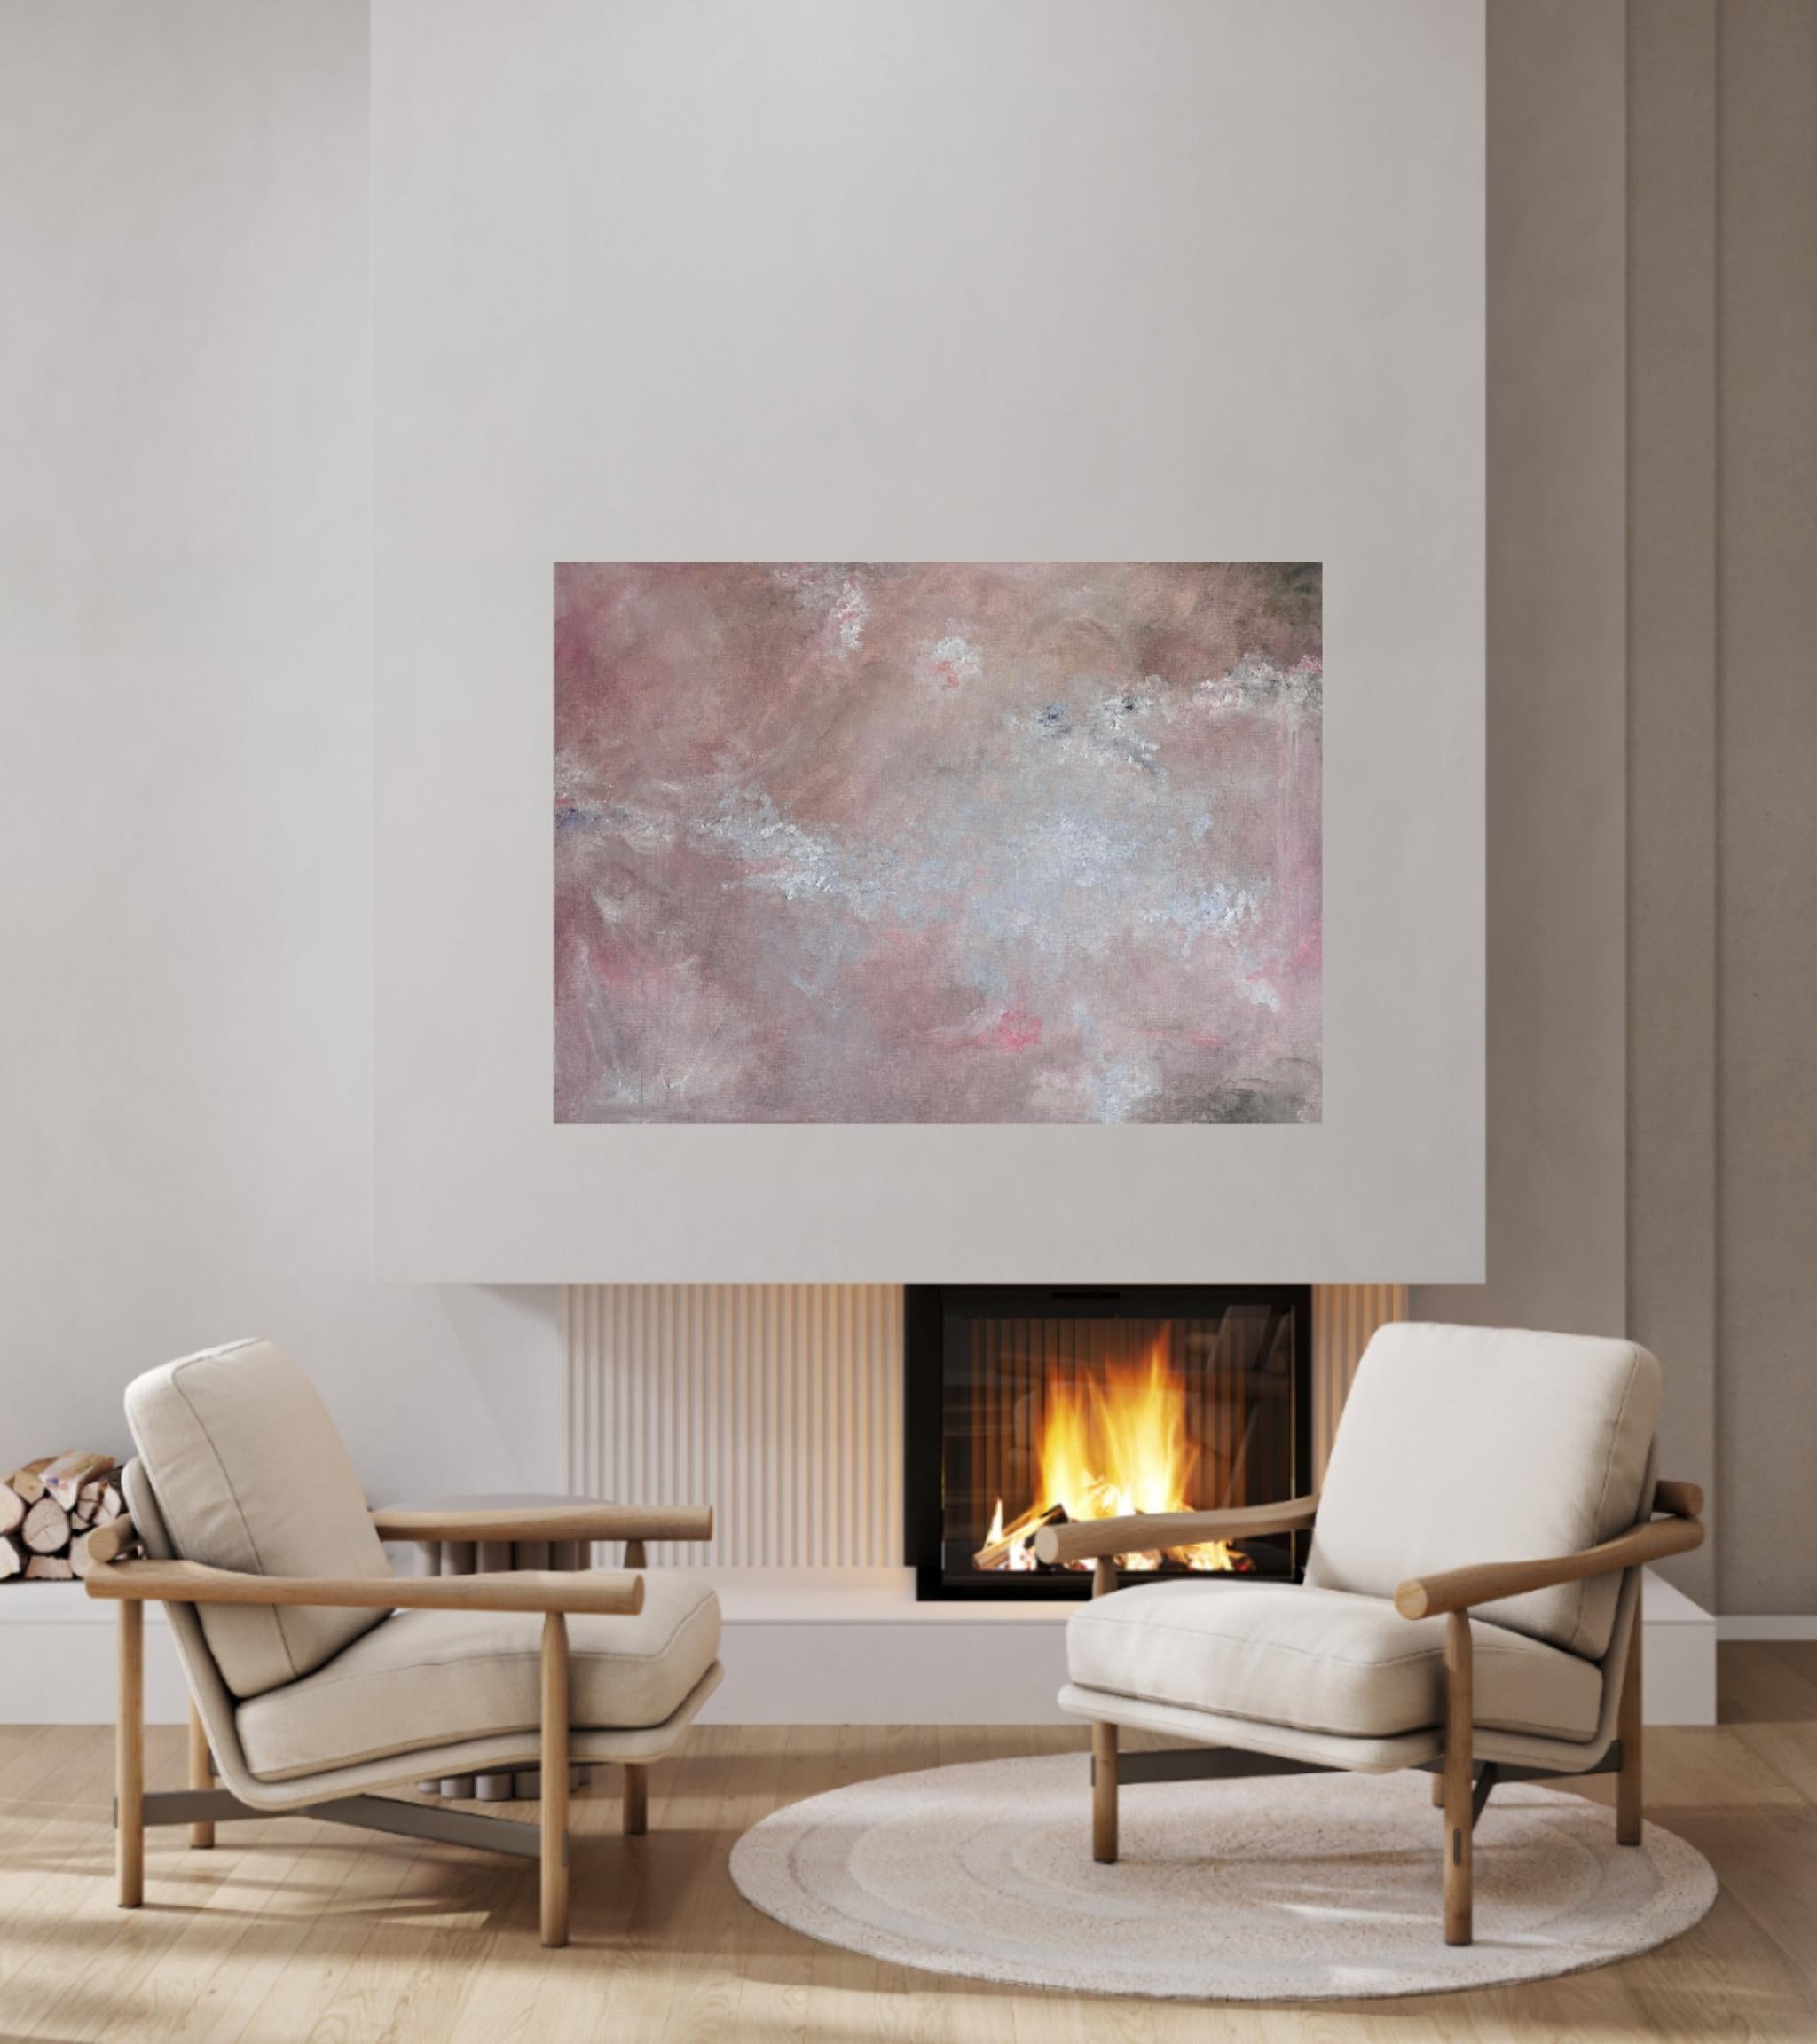 Piccolo grande amore - Soft abstract floral painting - Gray Abstract Painting by Jennifer L. Baker